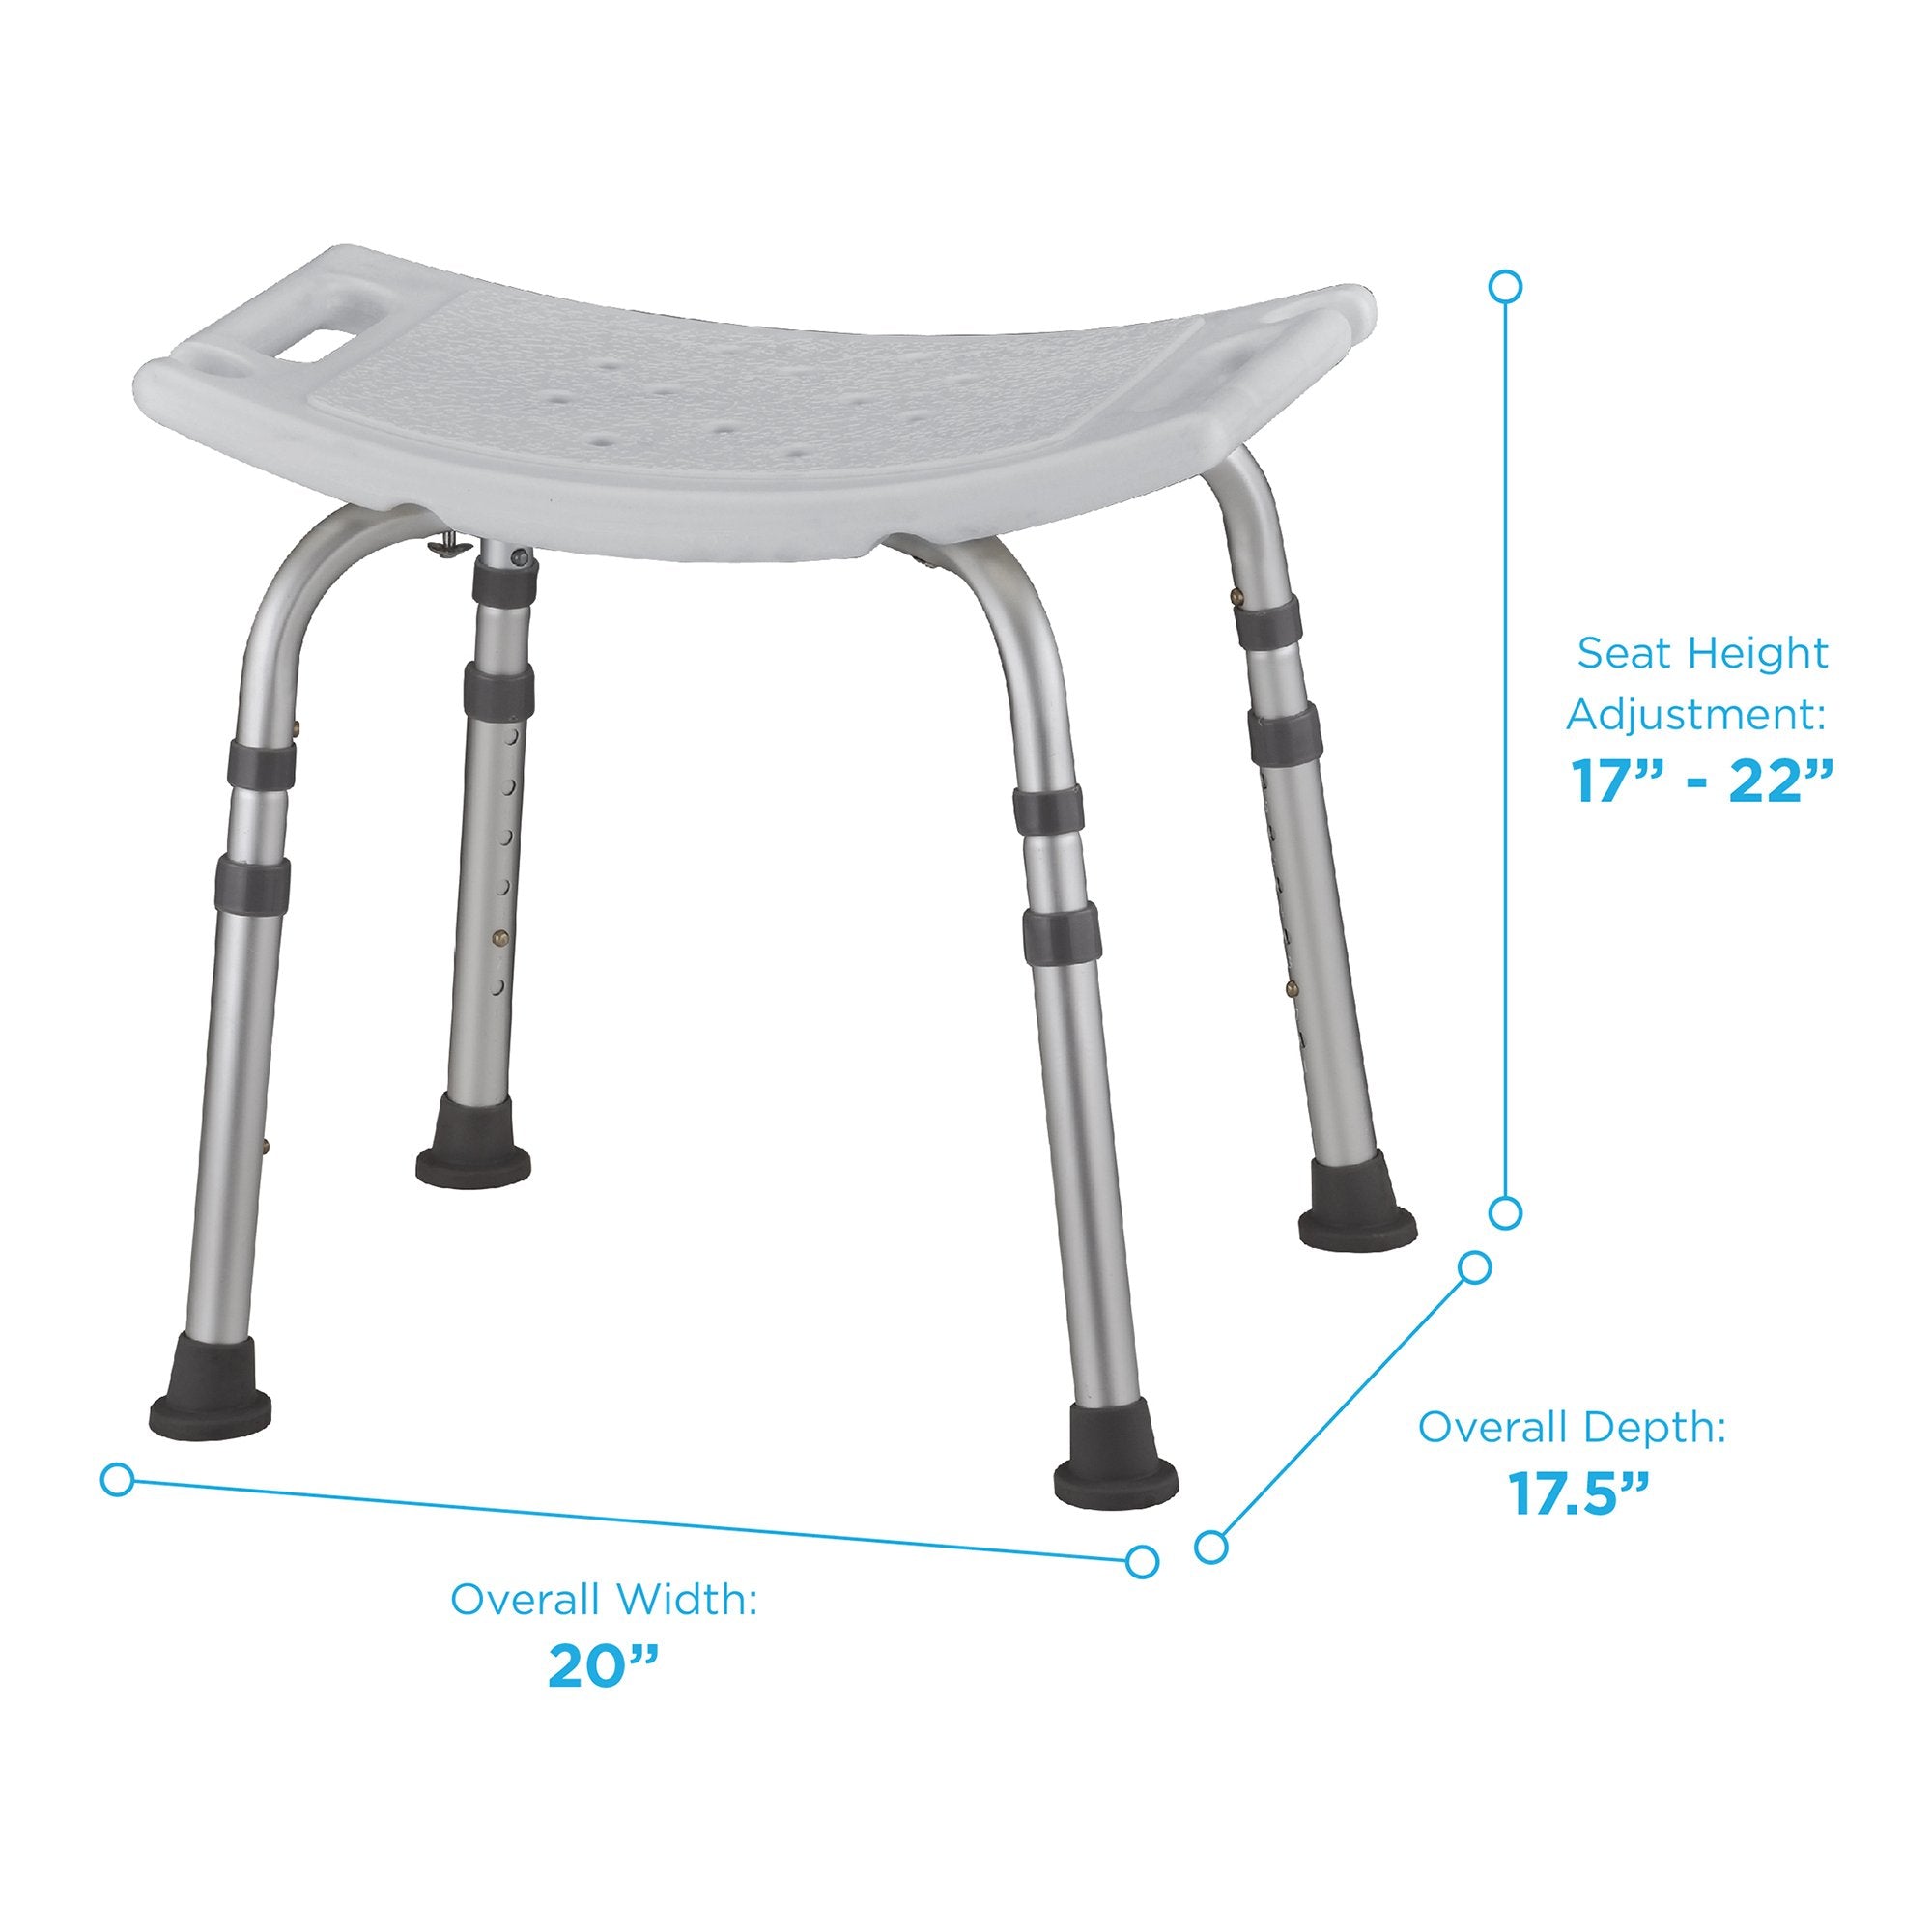 Shower Chair Nova Aluminum Frame Without Backrest 20 Inch Seat Width 300 lbs. Weight Capacity